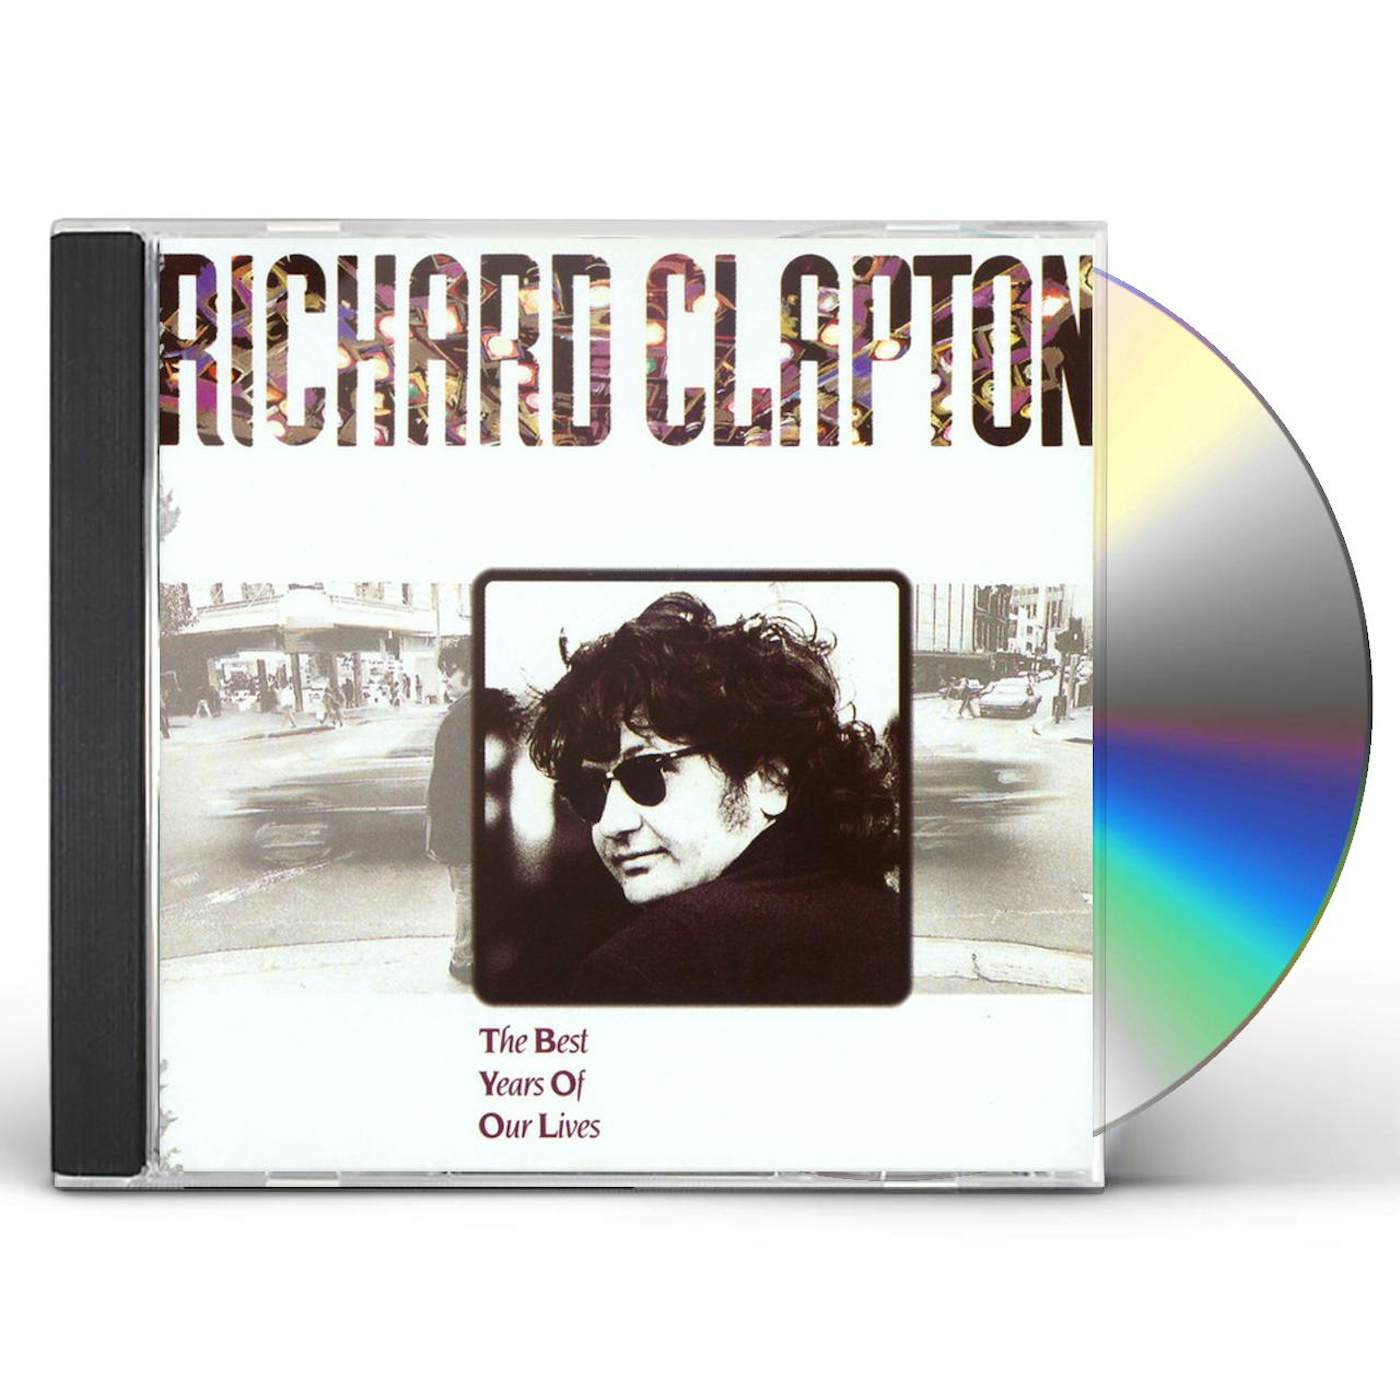 Richard Clapton BEST YEARD OF OUR LIVES CD